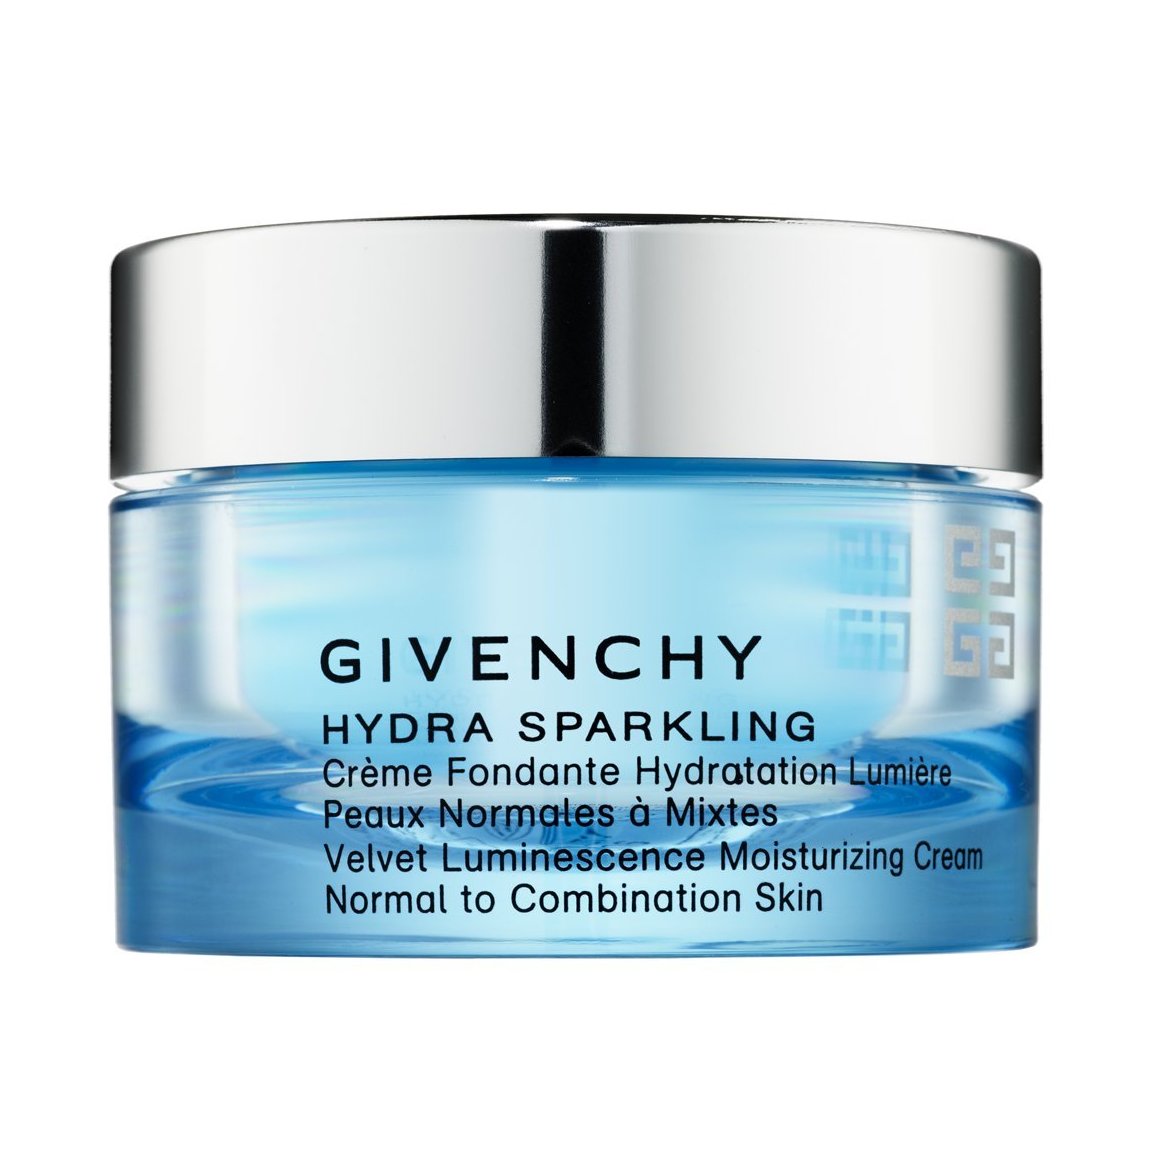 givenchy sparkling